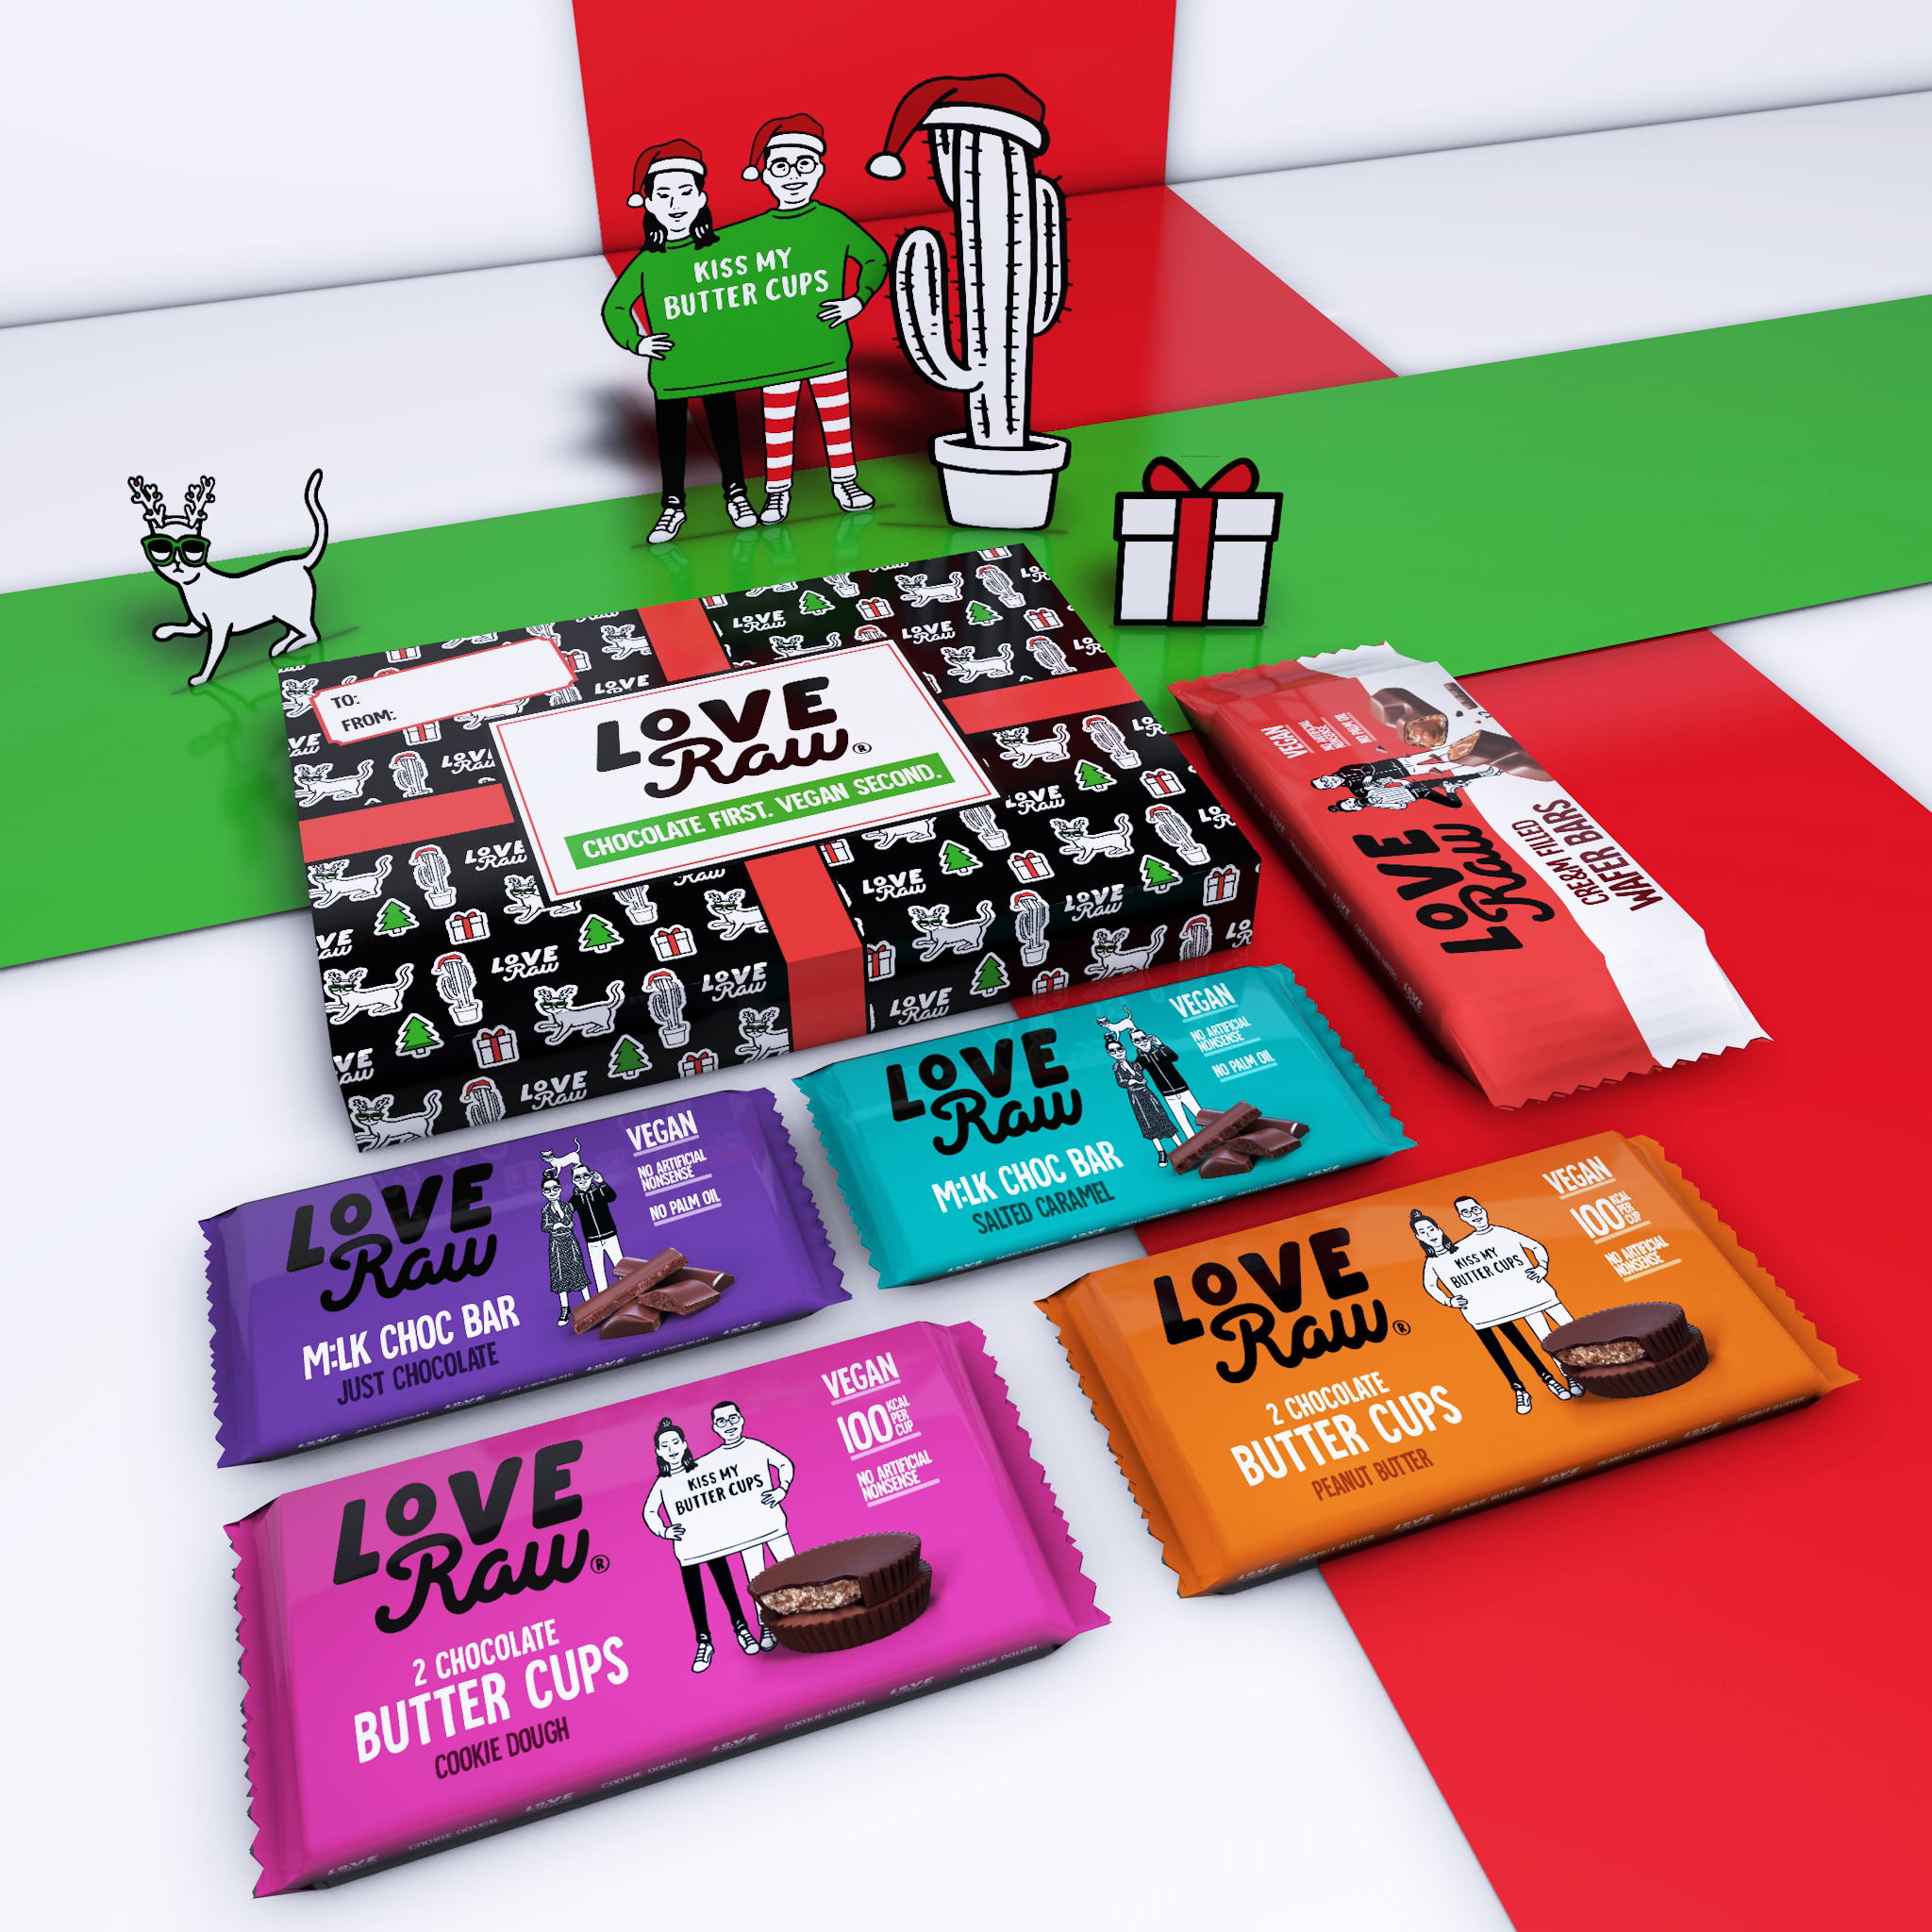 LoveRaw rolls out vegan Christmas selection boxes